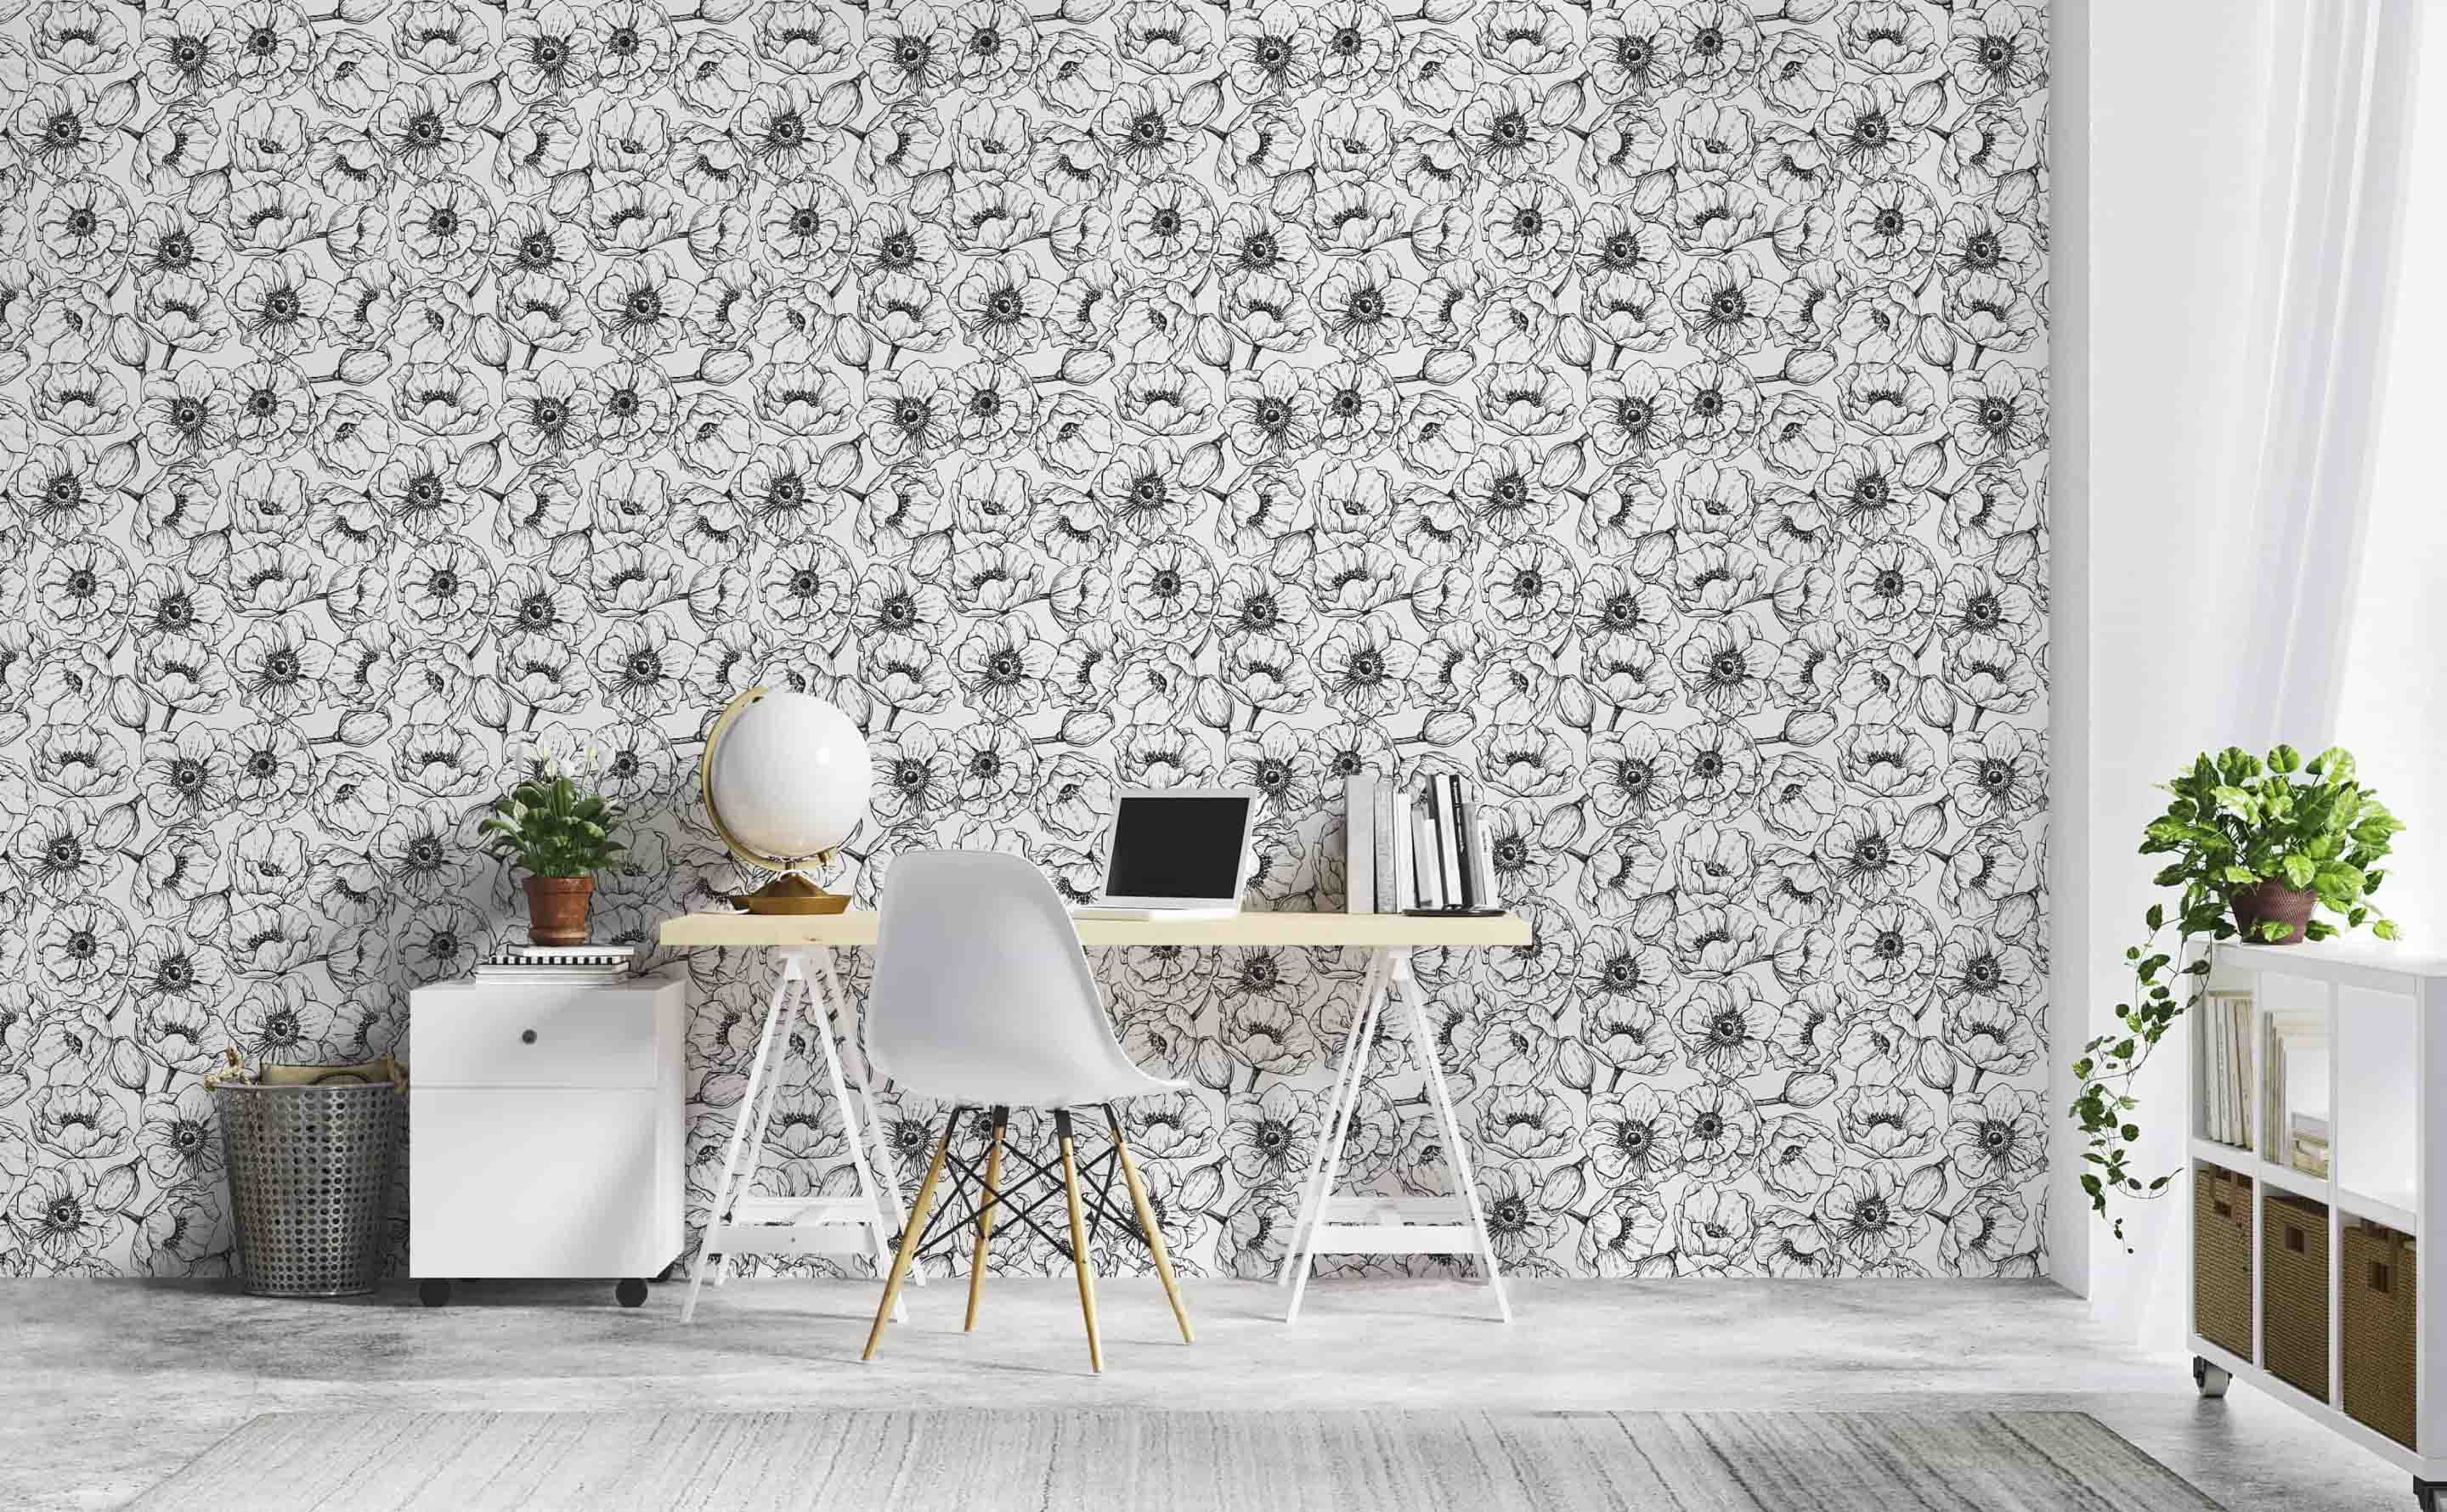 Floral Removable Wallpaper For A Fun & Cheerful Interior